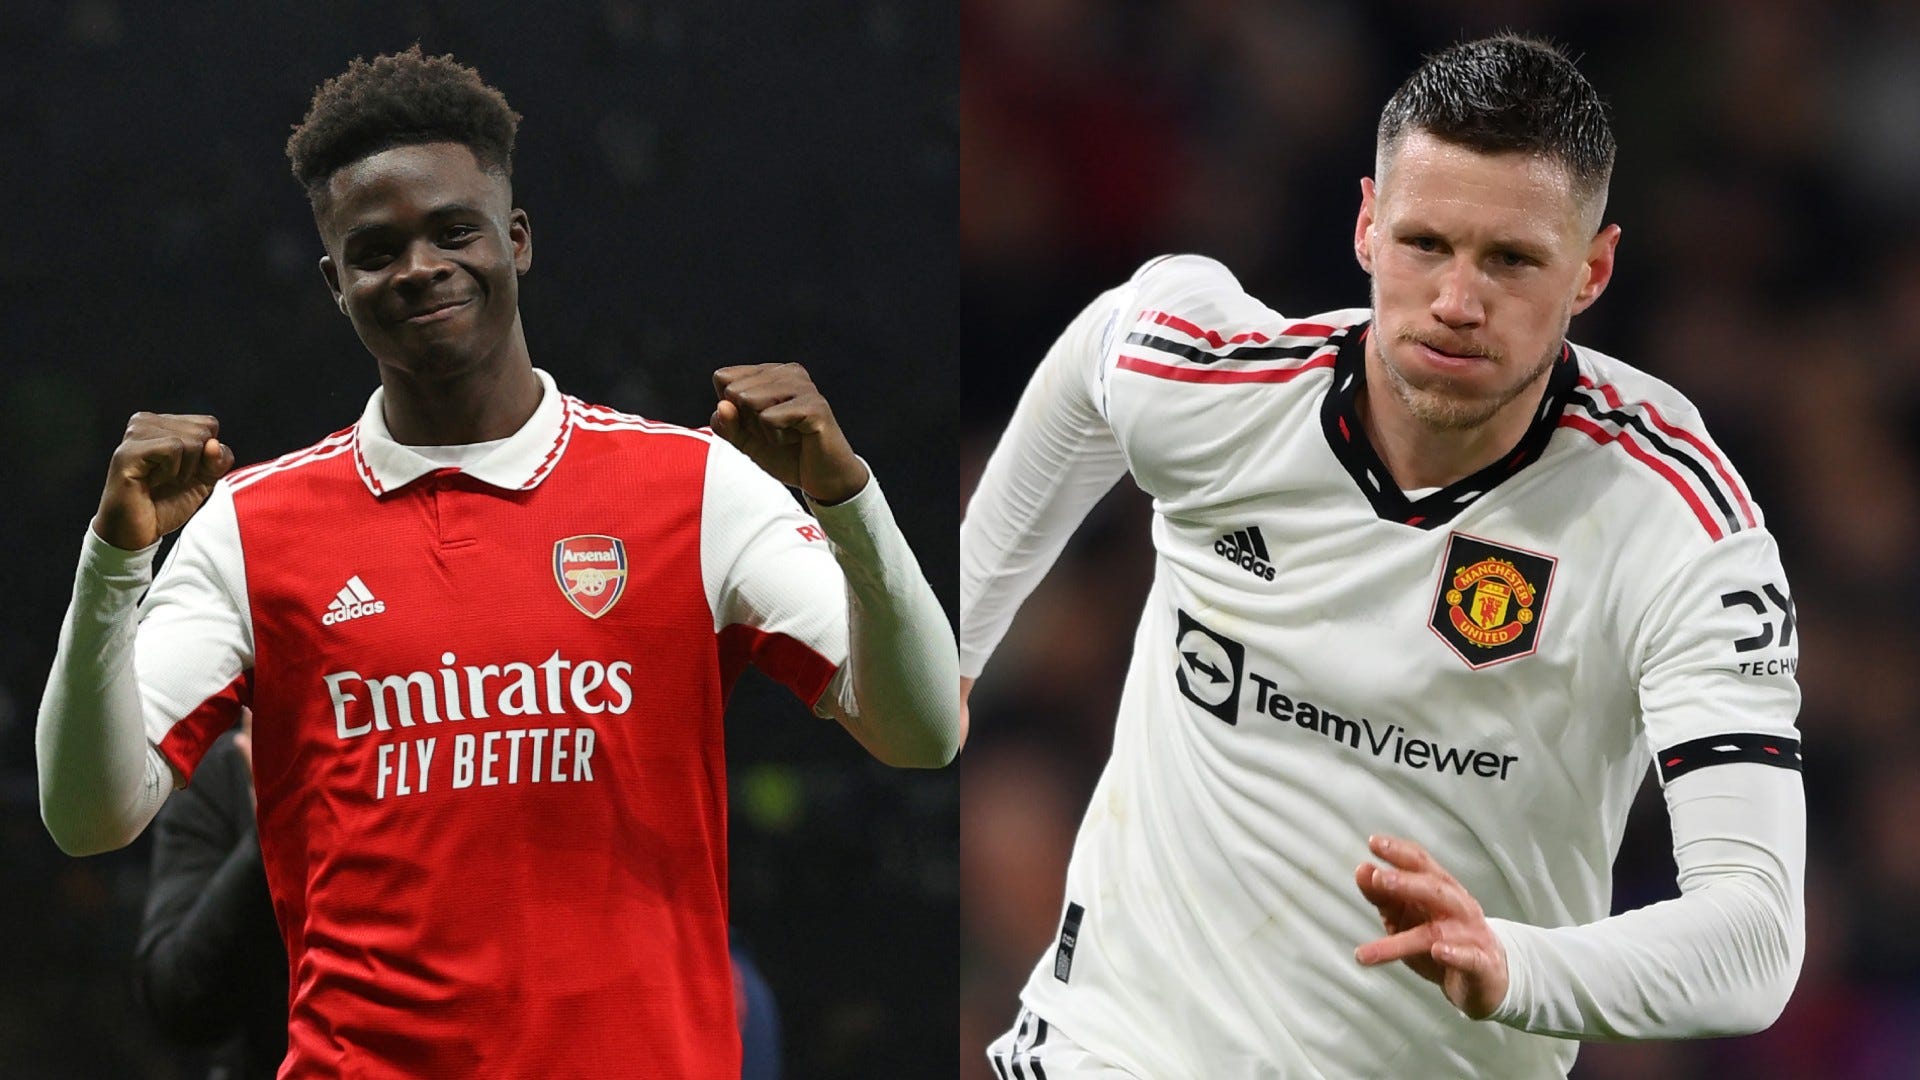 Arsenal vs Manchester United Live stream, TV channel, kick-off time and where to watch Goal Kenya